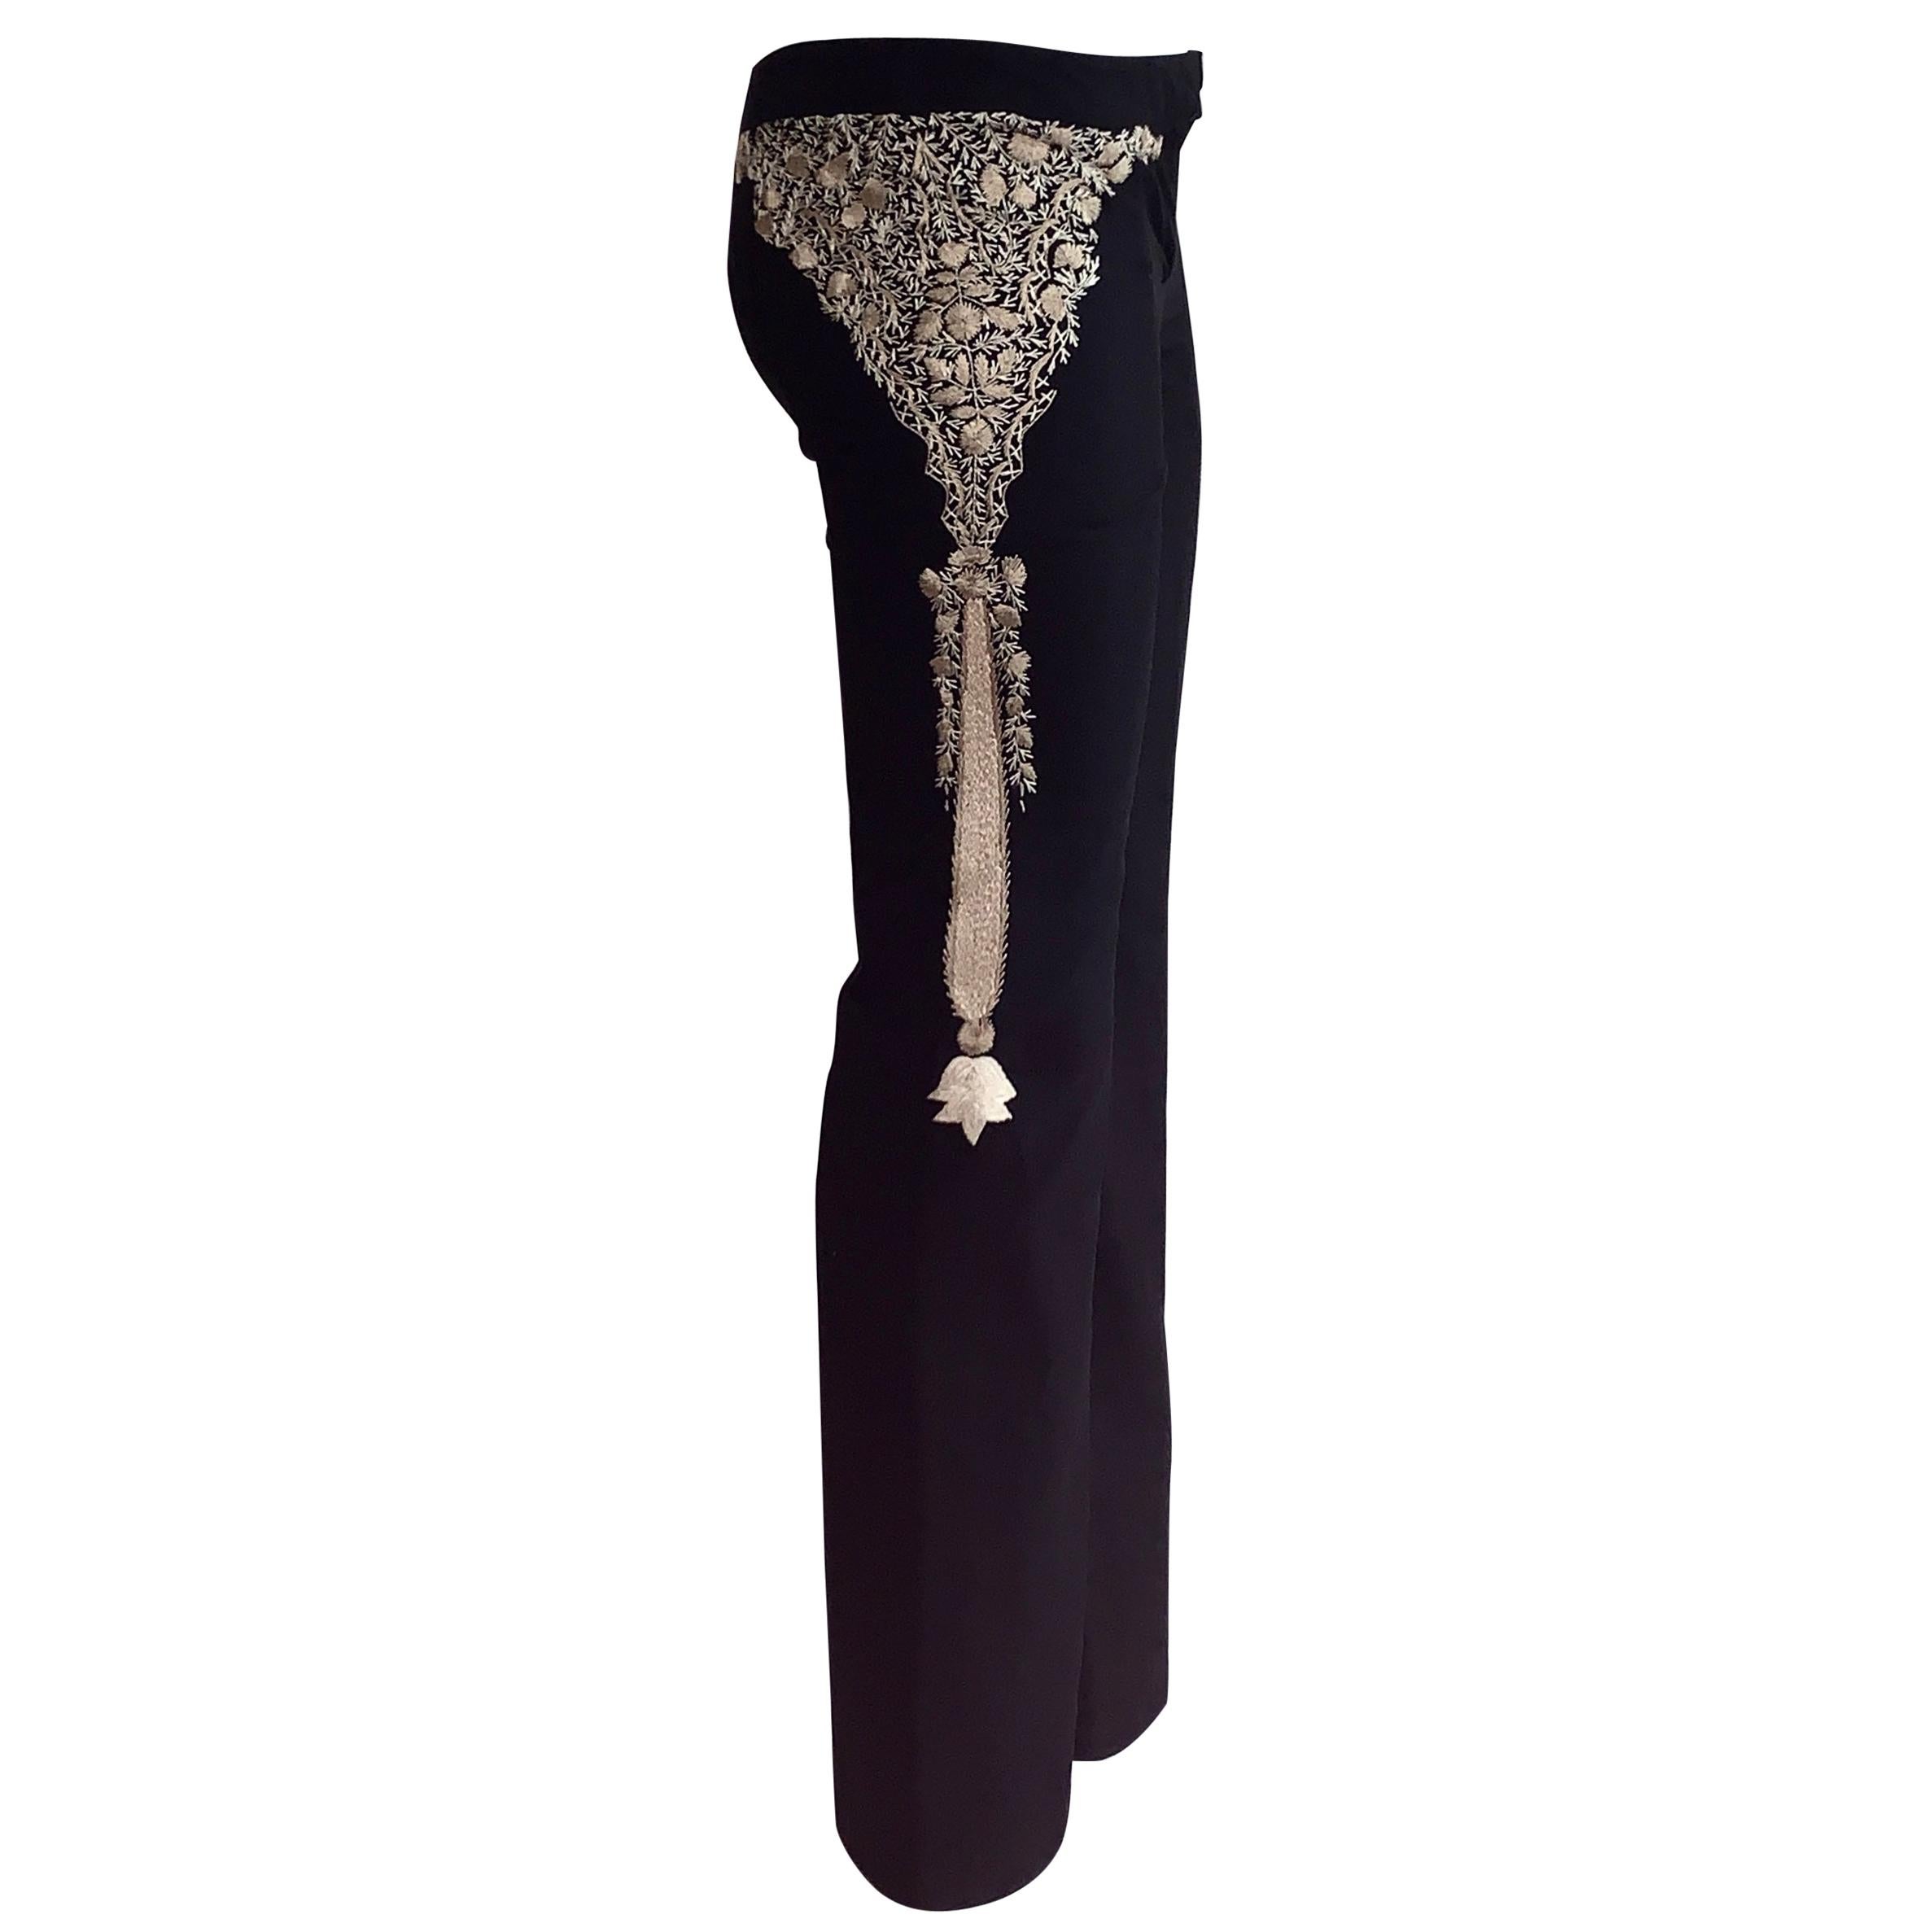 Alexander McQueen 2002 Black and Tan Embroidered Silk Pants Trousers